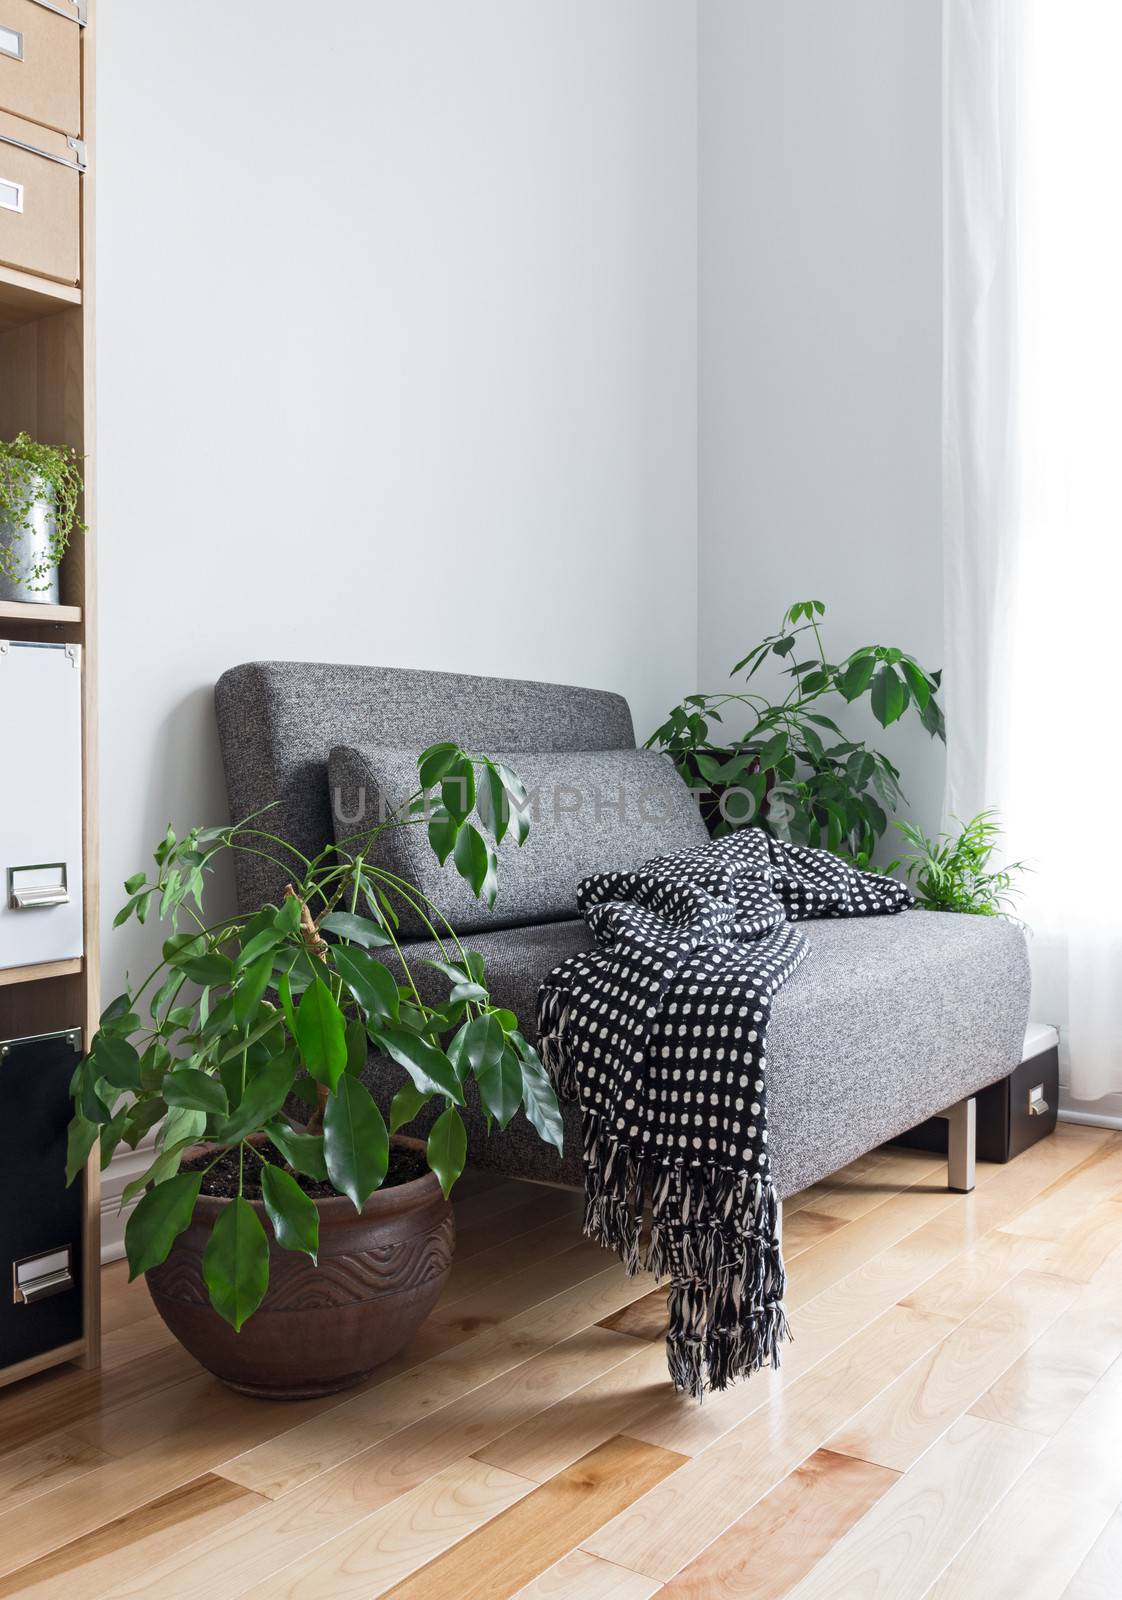 Living room with comfortable armchair, bookcase and green plants.